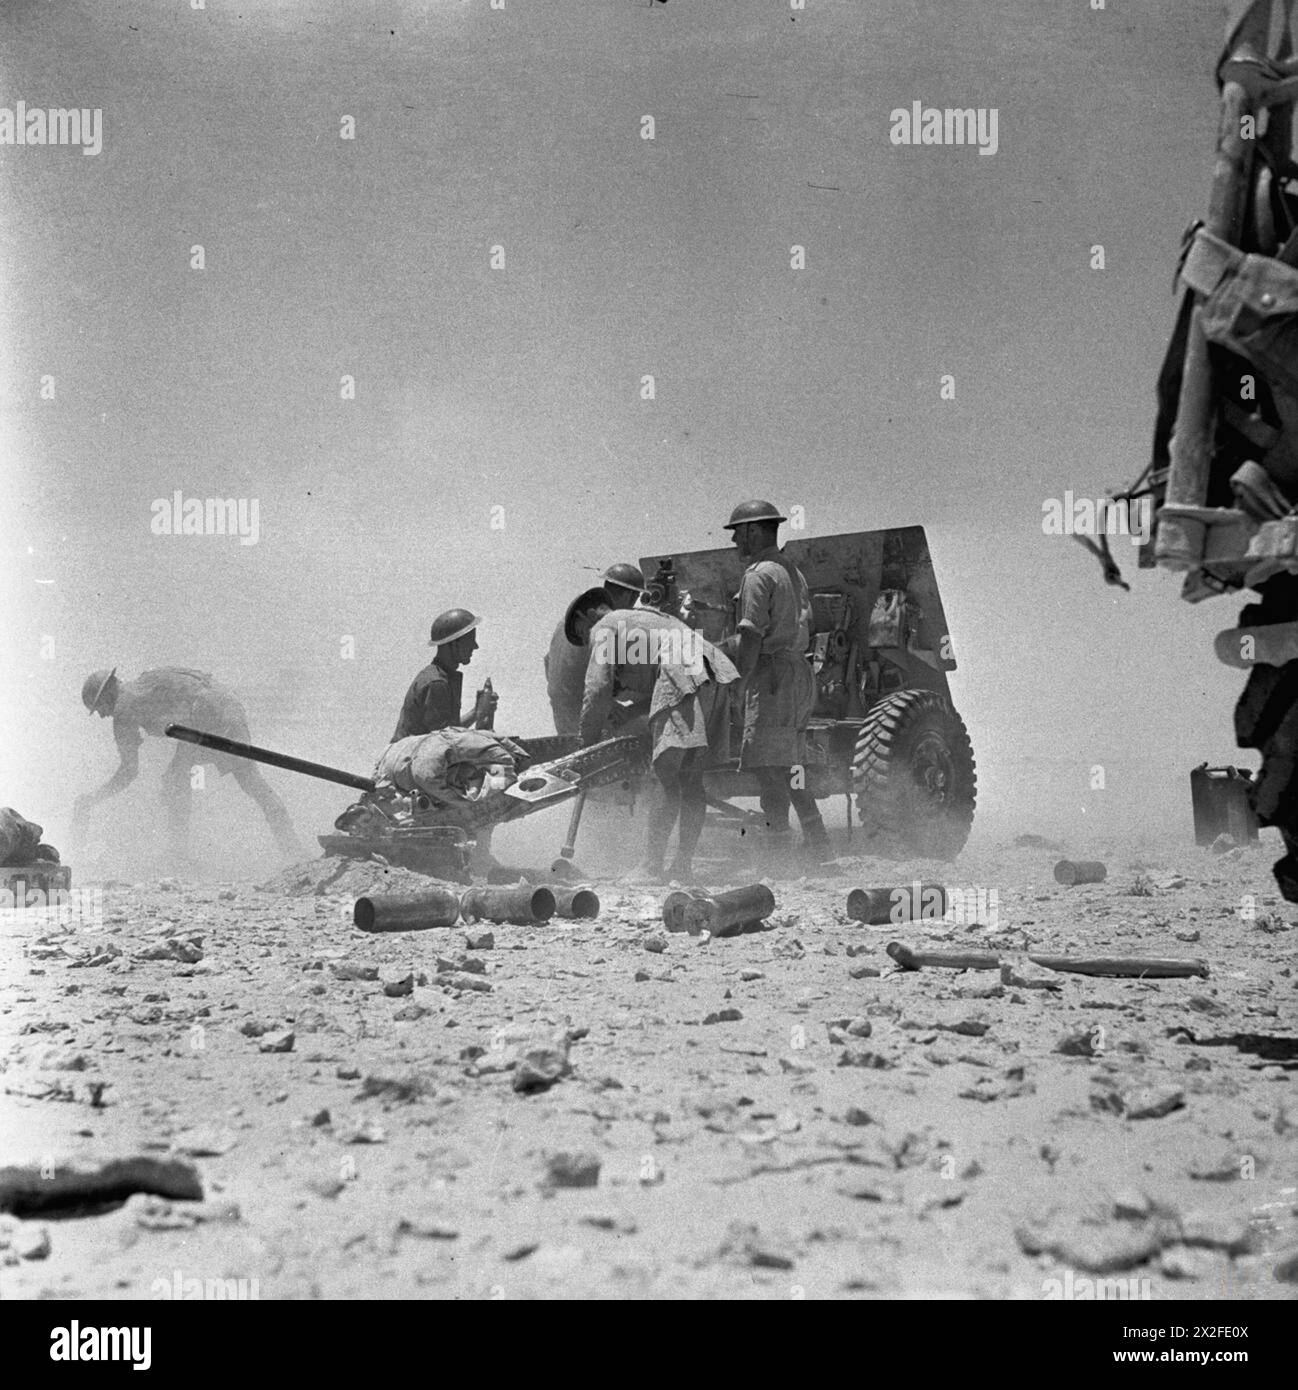 THE BRITISH ARMY IN NORTH AFRICA 1942 - A 25-pdr field gun of 11th Field Regiment, Royal Artillery, in action during the First Battle of El Alamein, July 1942 Stock Photo